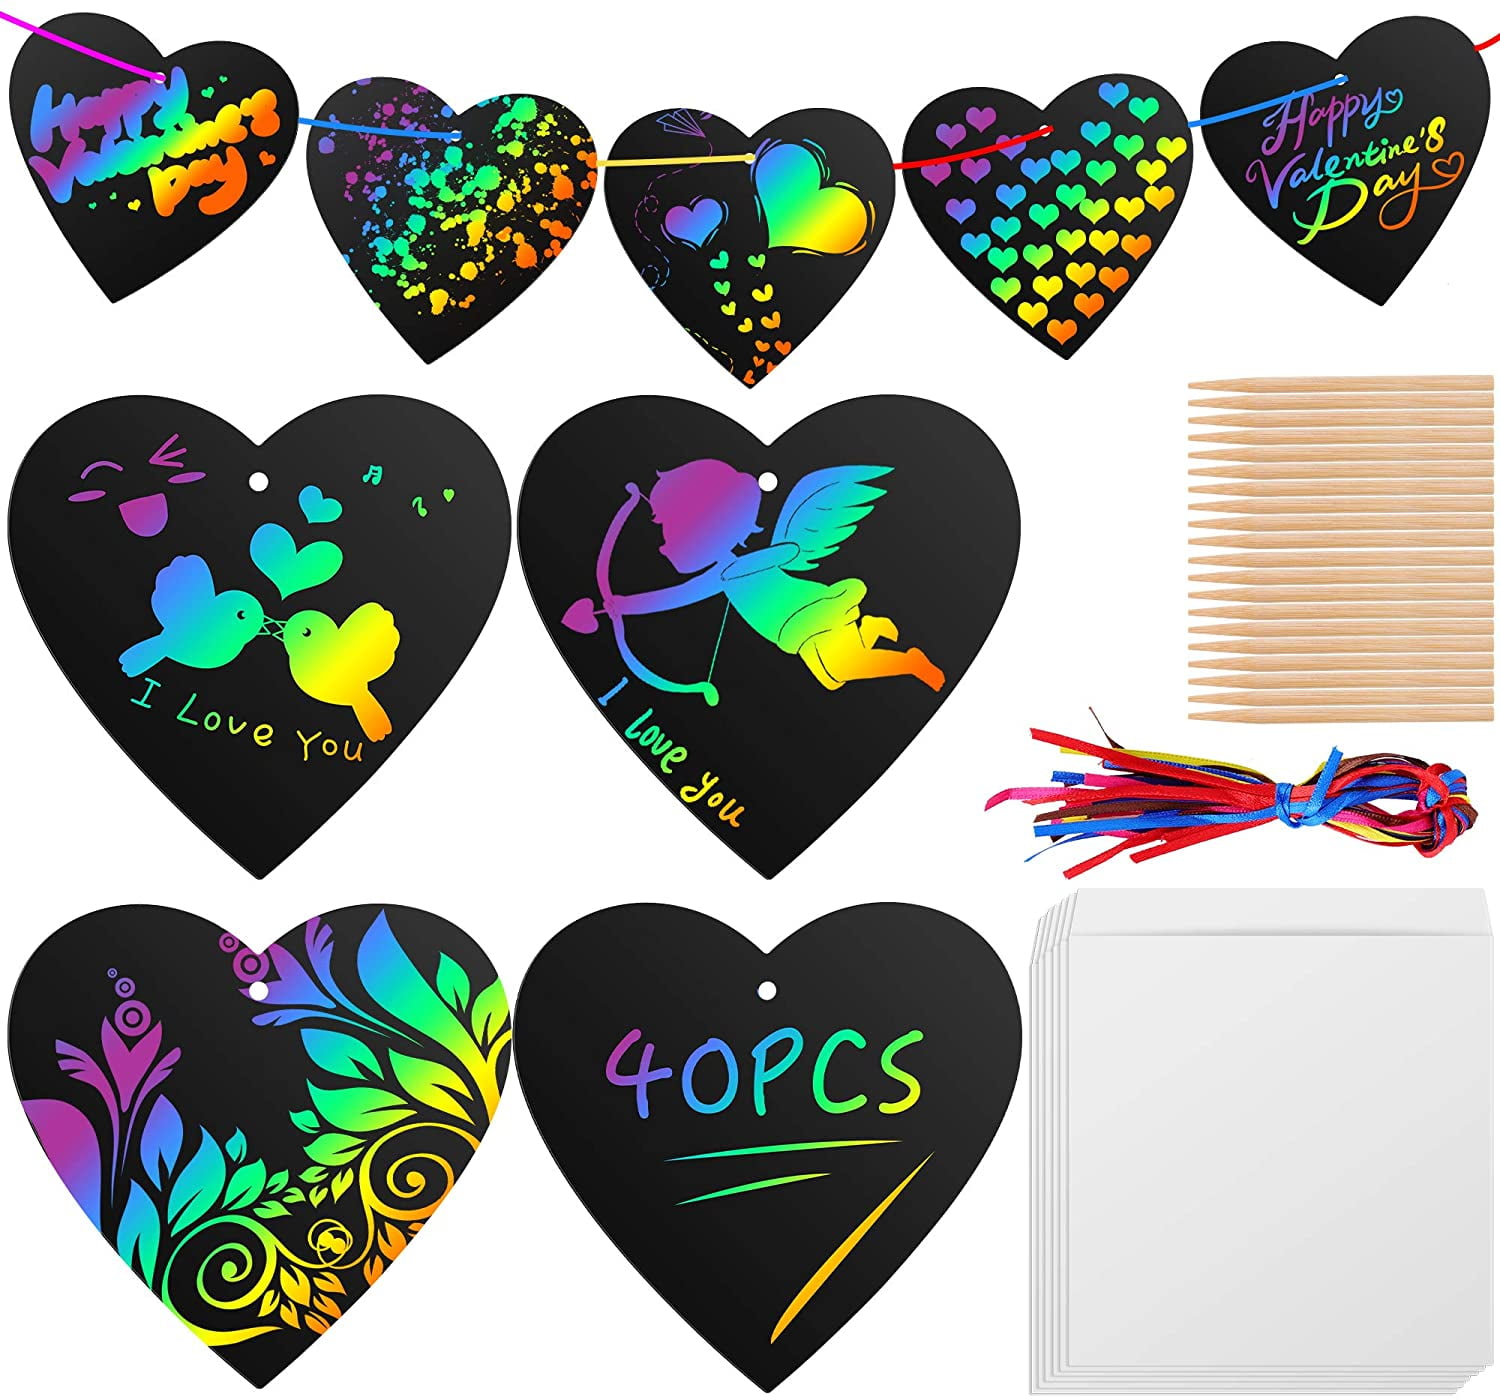 Valentines Crafts for Kids-28 Heart Shape Scratch Paper Art Set for Valentines DIY Art Decorations,Rainbow Scratch Craft Kit for School Class Valentines Art Activity,Valentines Day Gifts for Kids 